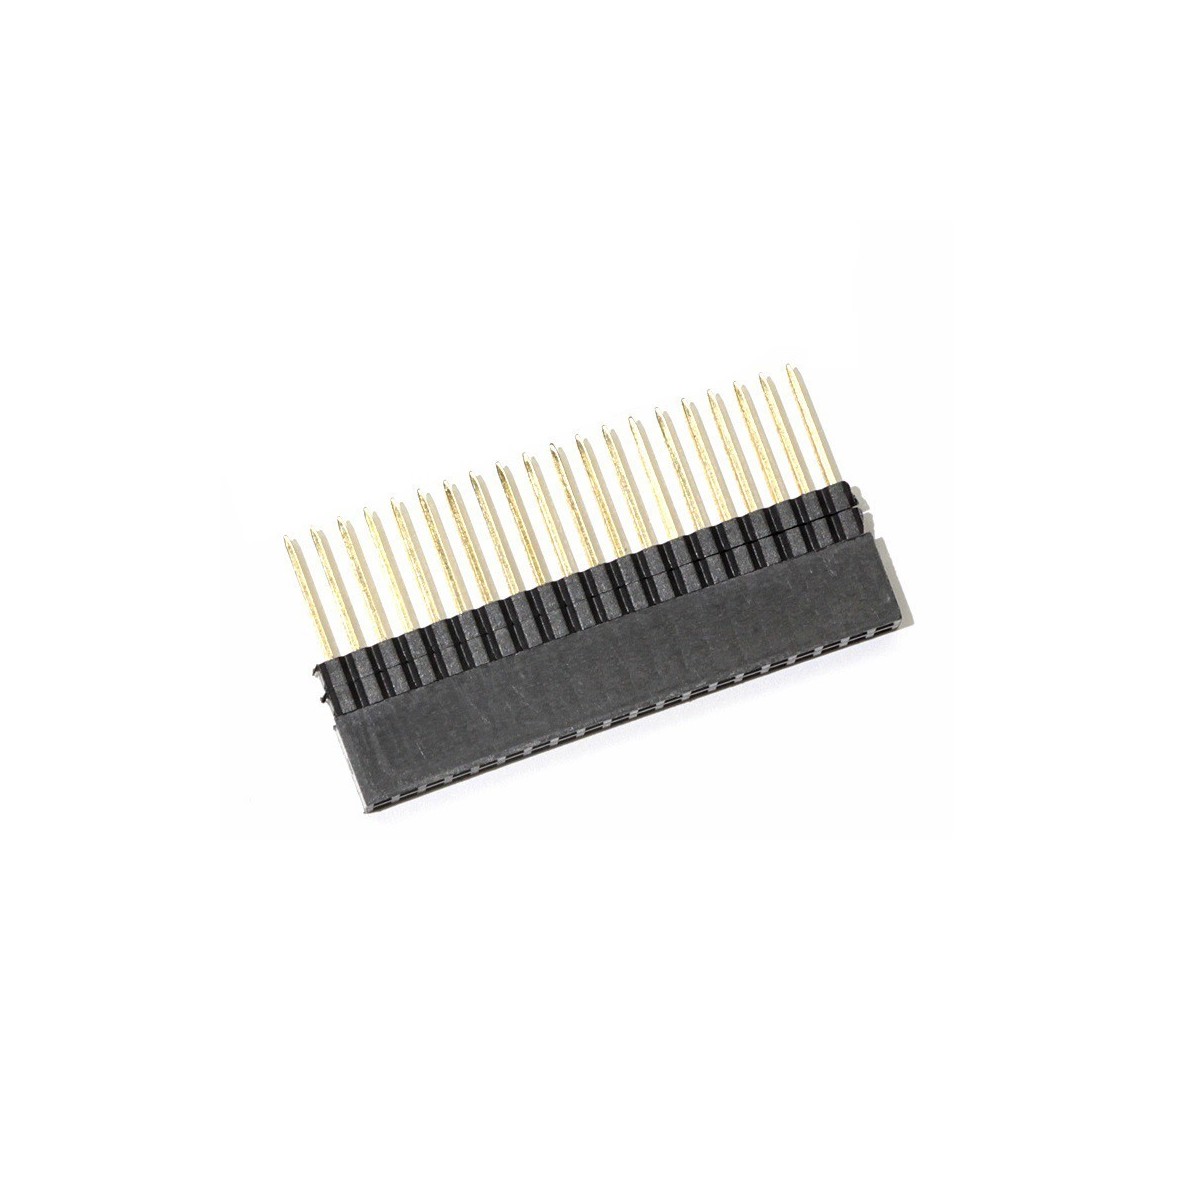 Pin header 40-pin stackable for Raspberry Pi